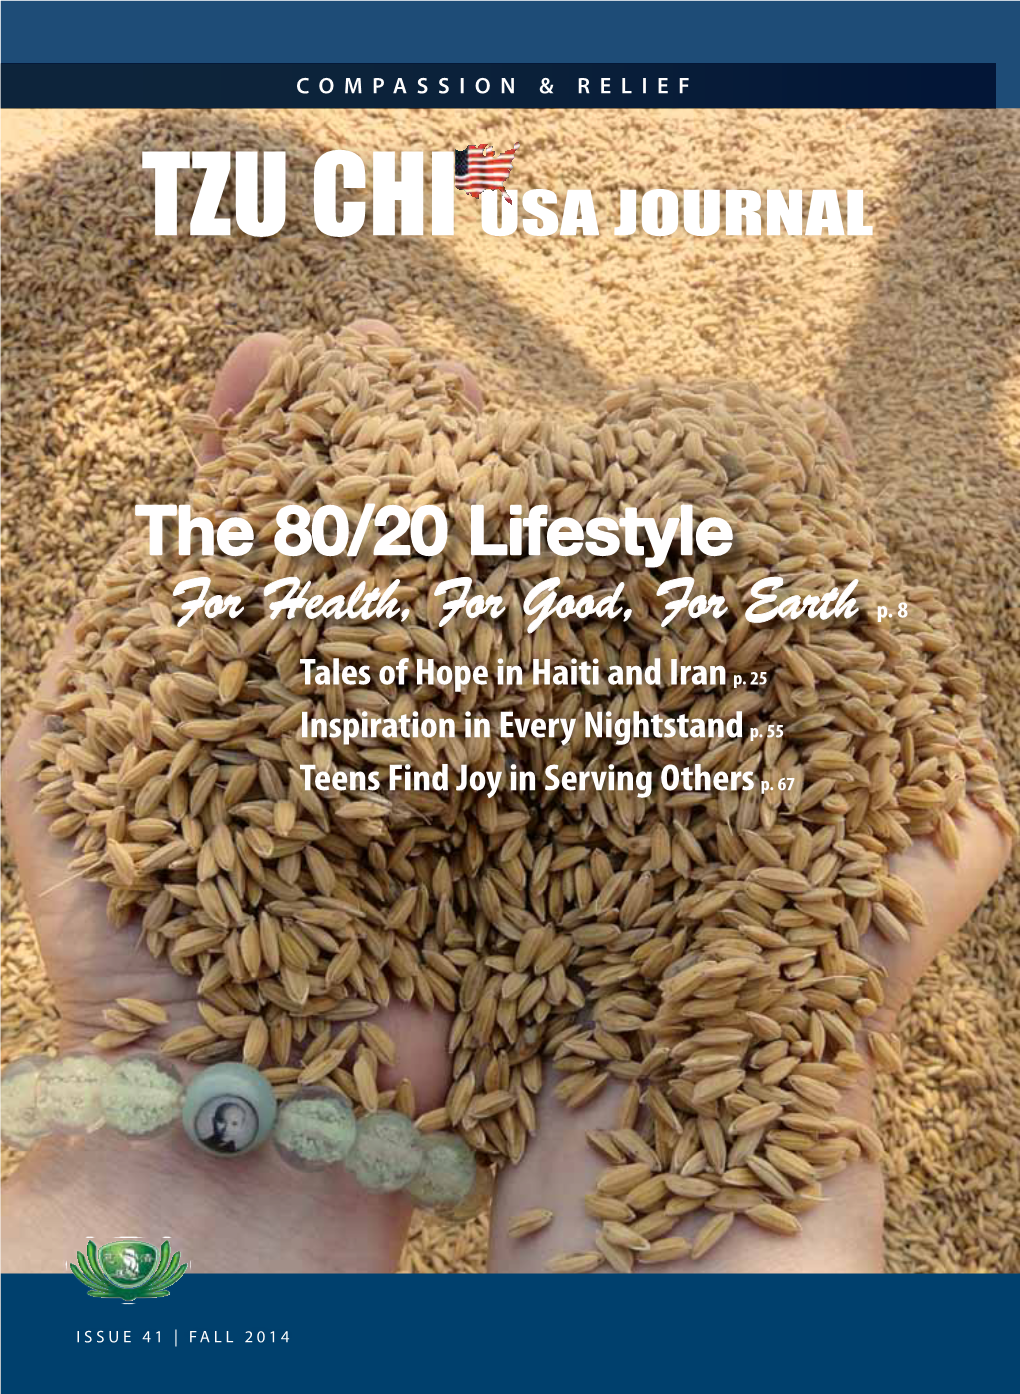 The 80/20 Lifestyle for Health, for Good, for Earth P